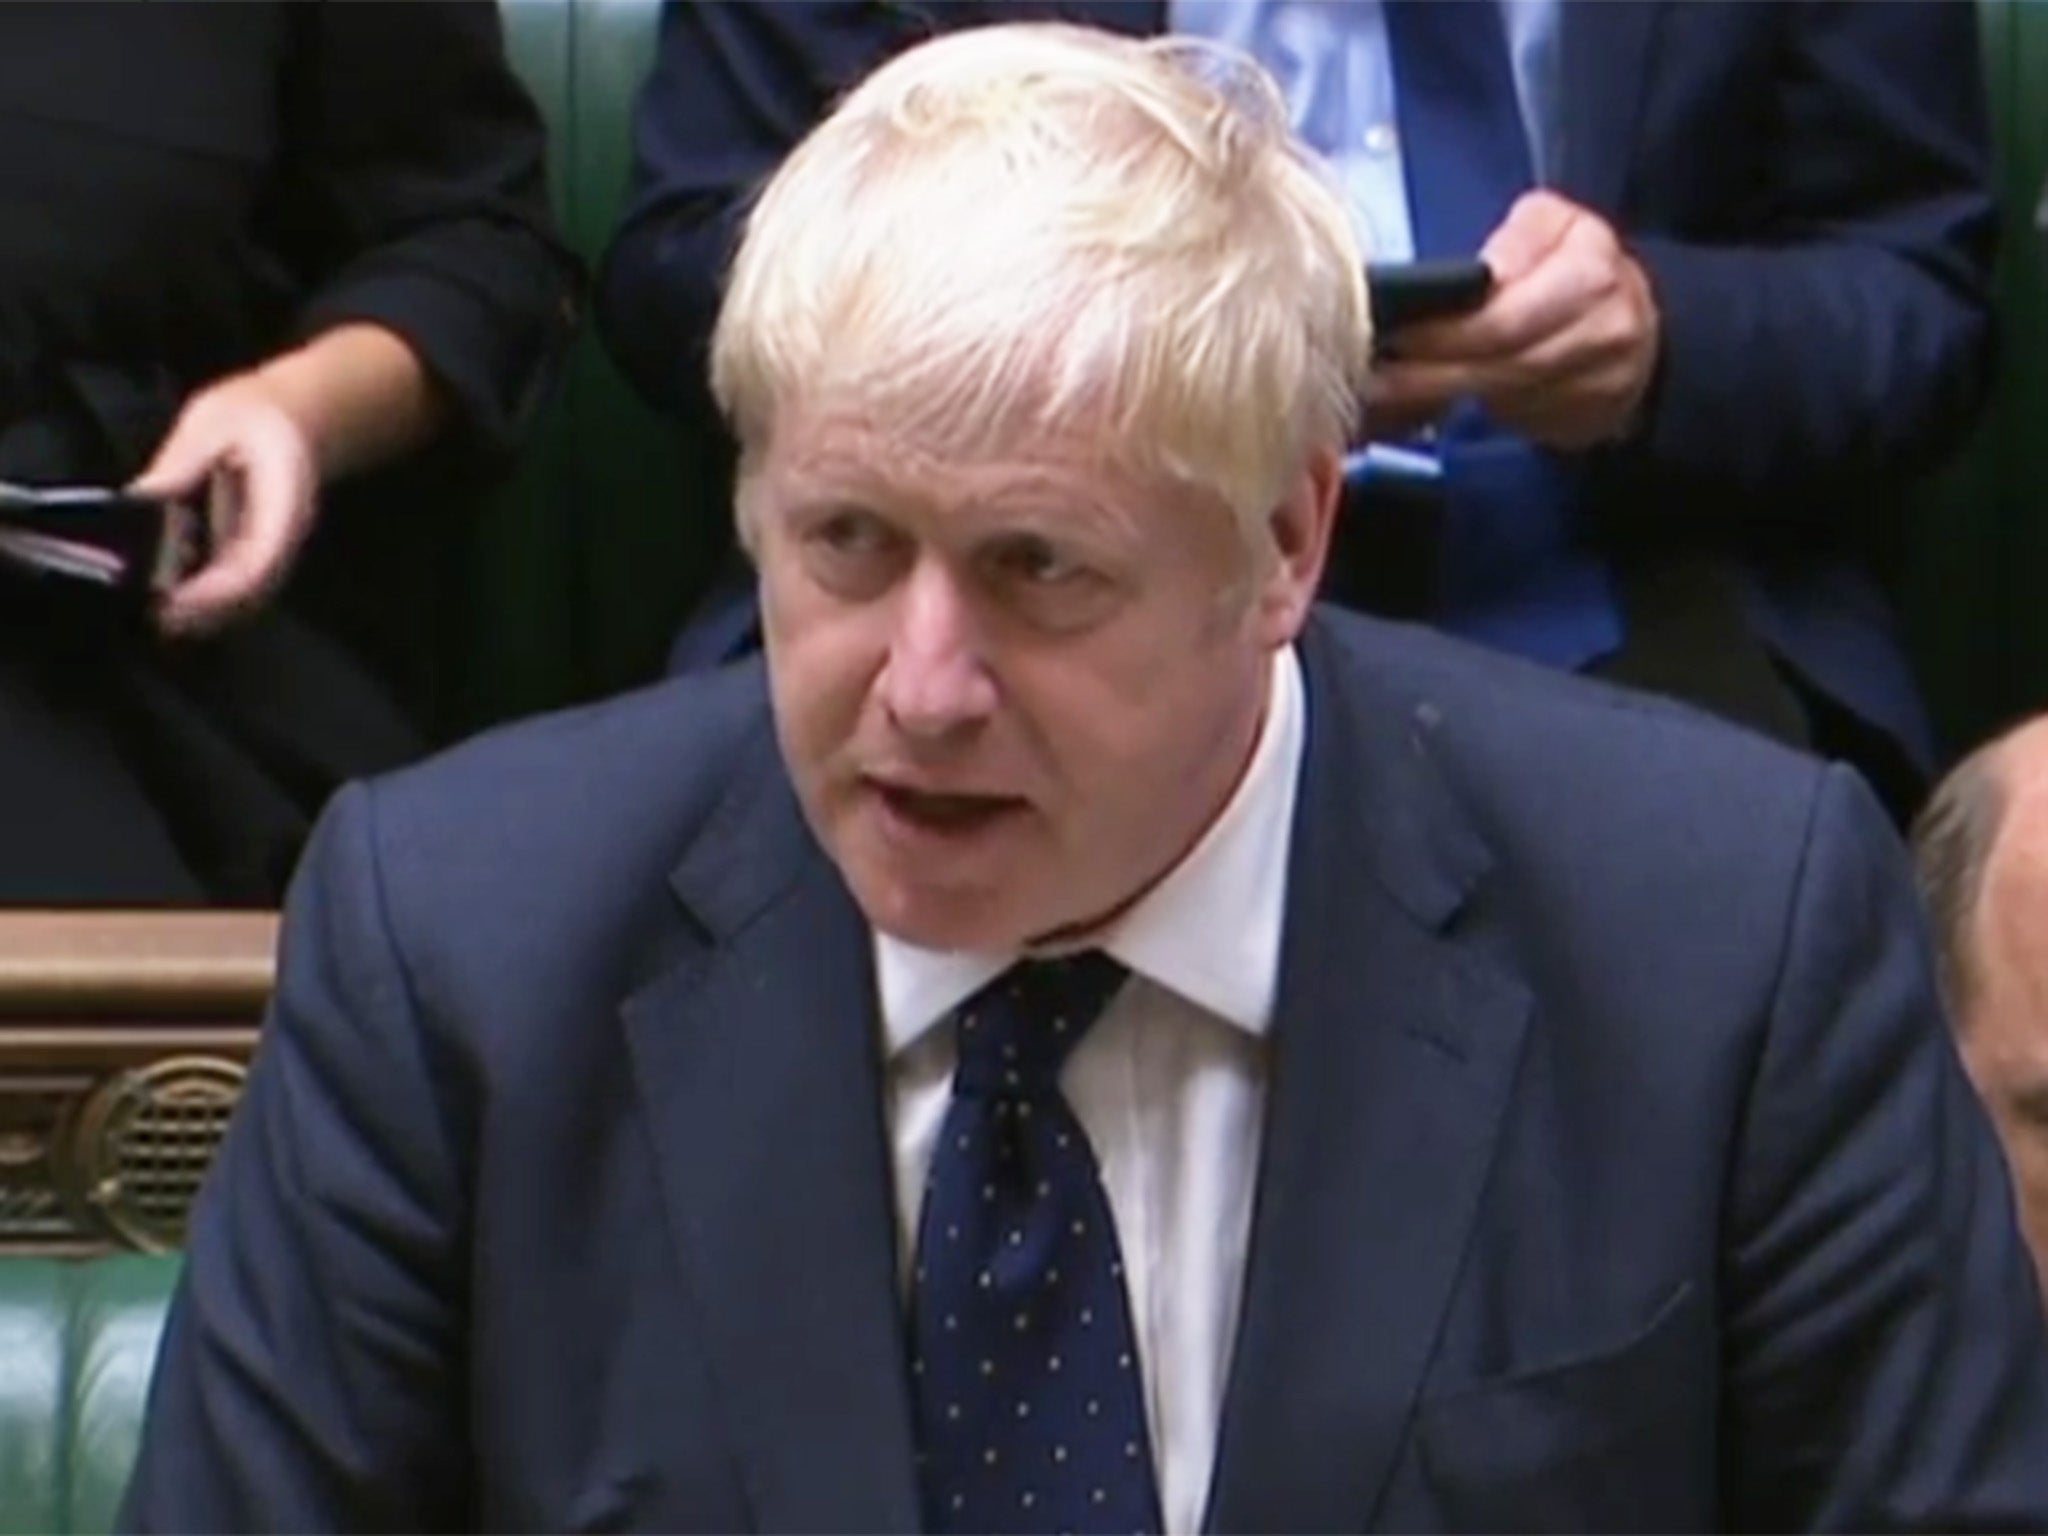 Johnson issued a swift statement to the Commons on Monday